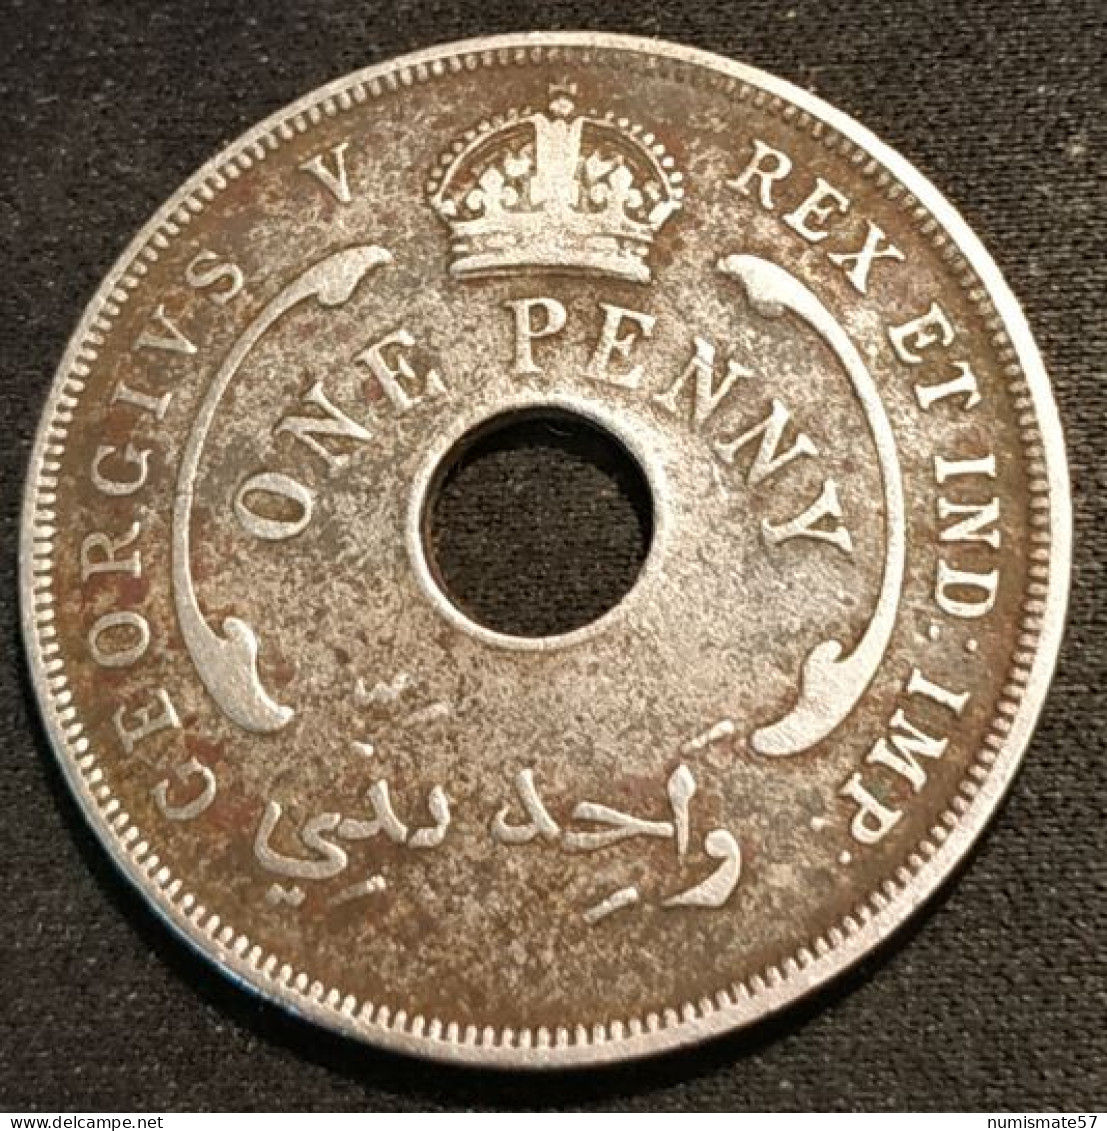 BRITISH WEST AFRICA - ONE PENNY 1928 - George V - KM 9 - ( Afrique Occidentale Britannique ) - Colonies